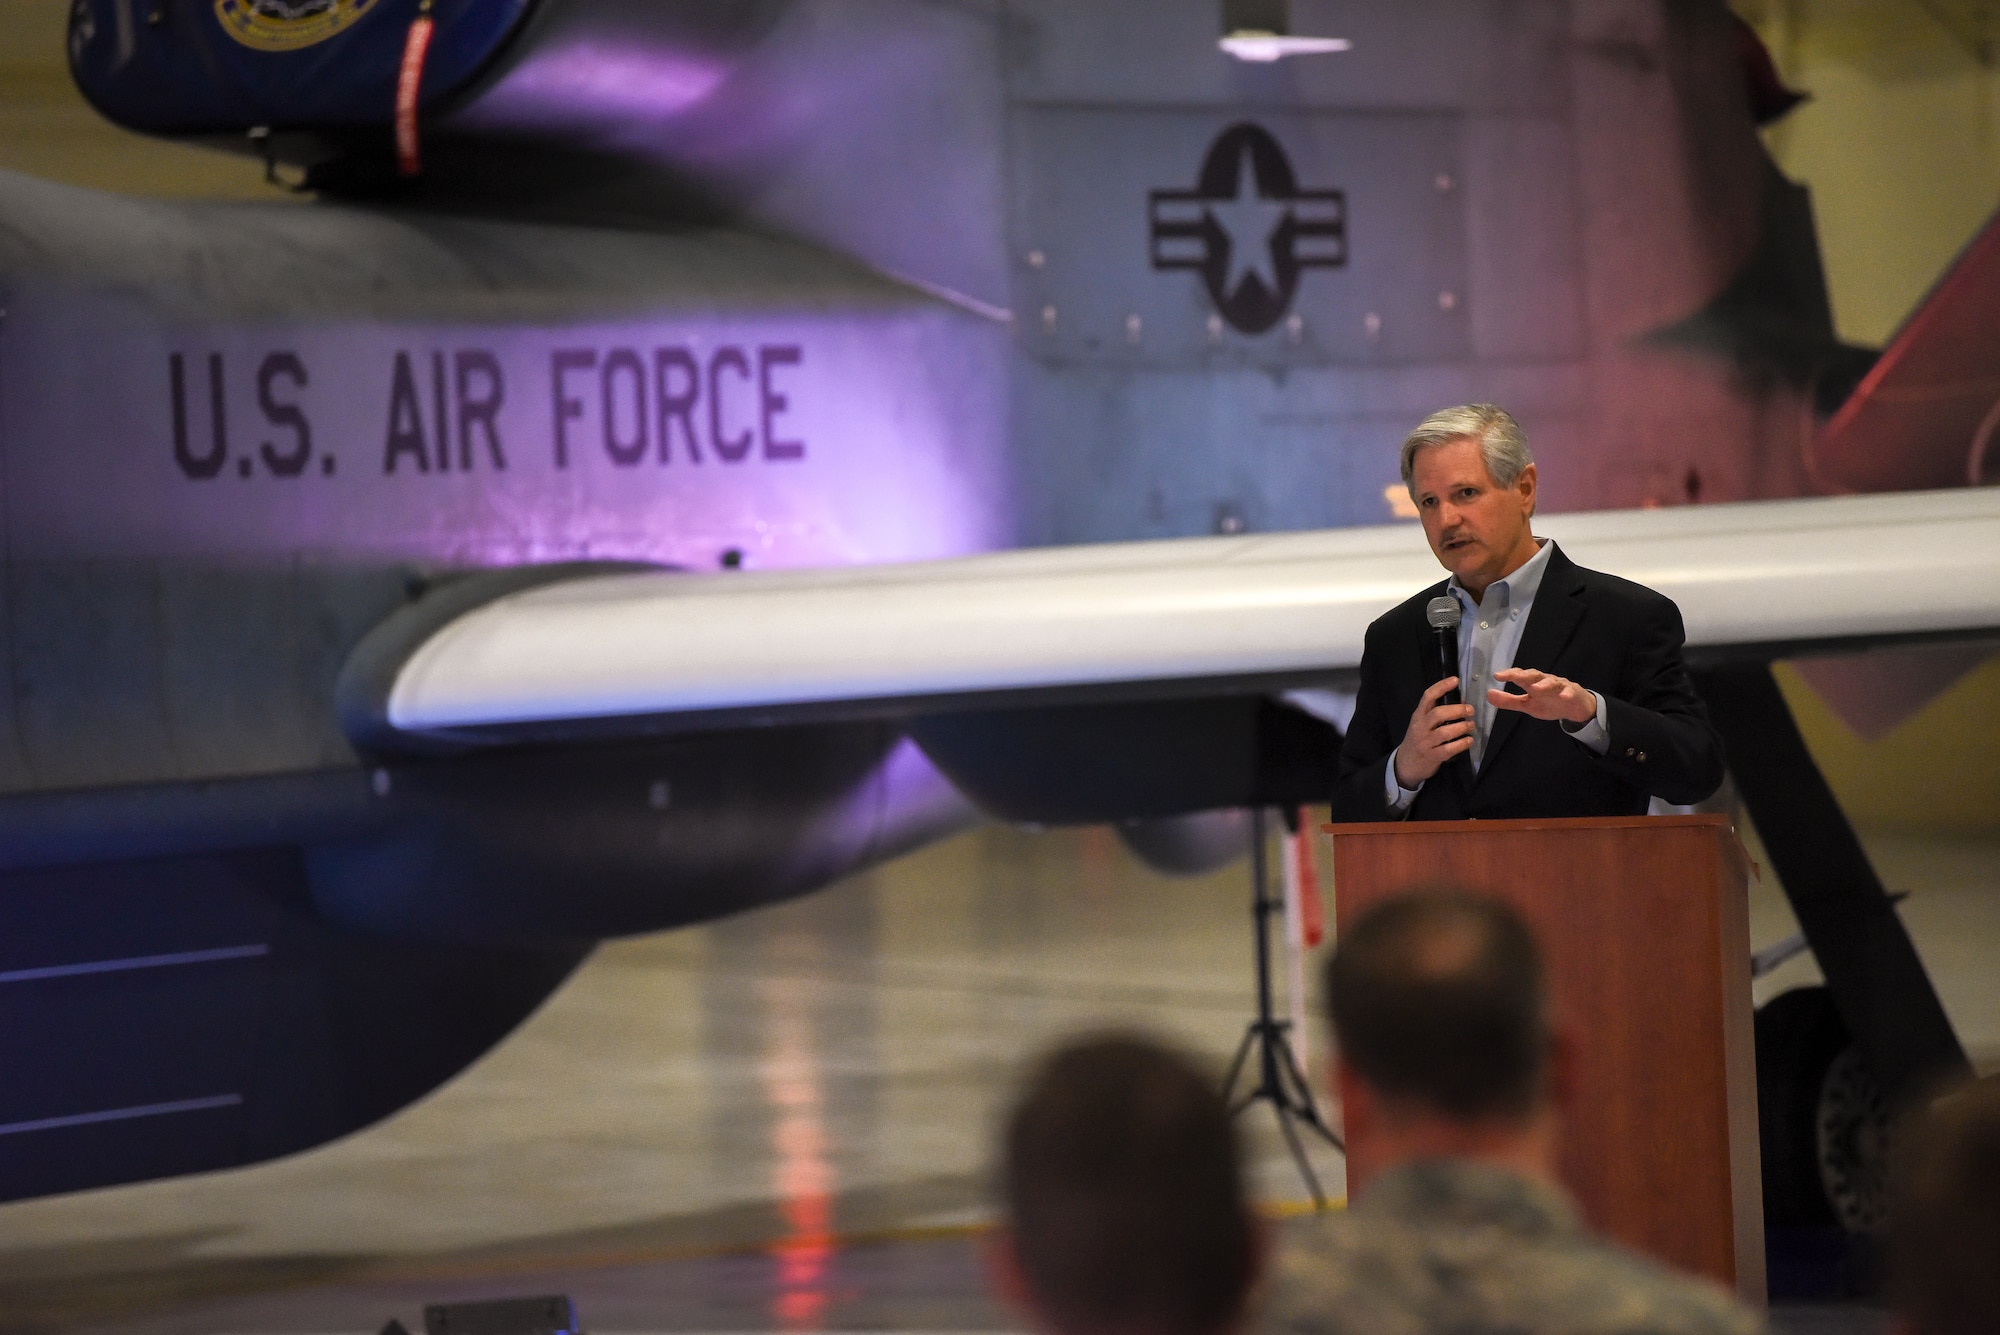 John Hoeven, U.S. Senator of North Dakota, spoke with Air Force leadership and Grand Forks community partners at Grand Forks Air Force Base, North Dakota, prior to the announcement of the upcoming 319th Air Base Wing’s re-designation to the 319th Reconnaissance Wing May 11, 2019. The official re-designation ceremony is scheduled for June 28, 2019, the effective date of re-designation. (U.S. Air Force photo by Staff Sergeant Michael Reeves Jr.)